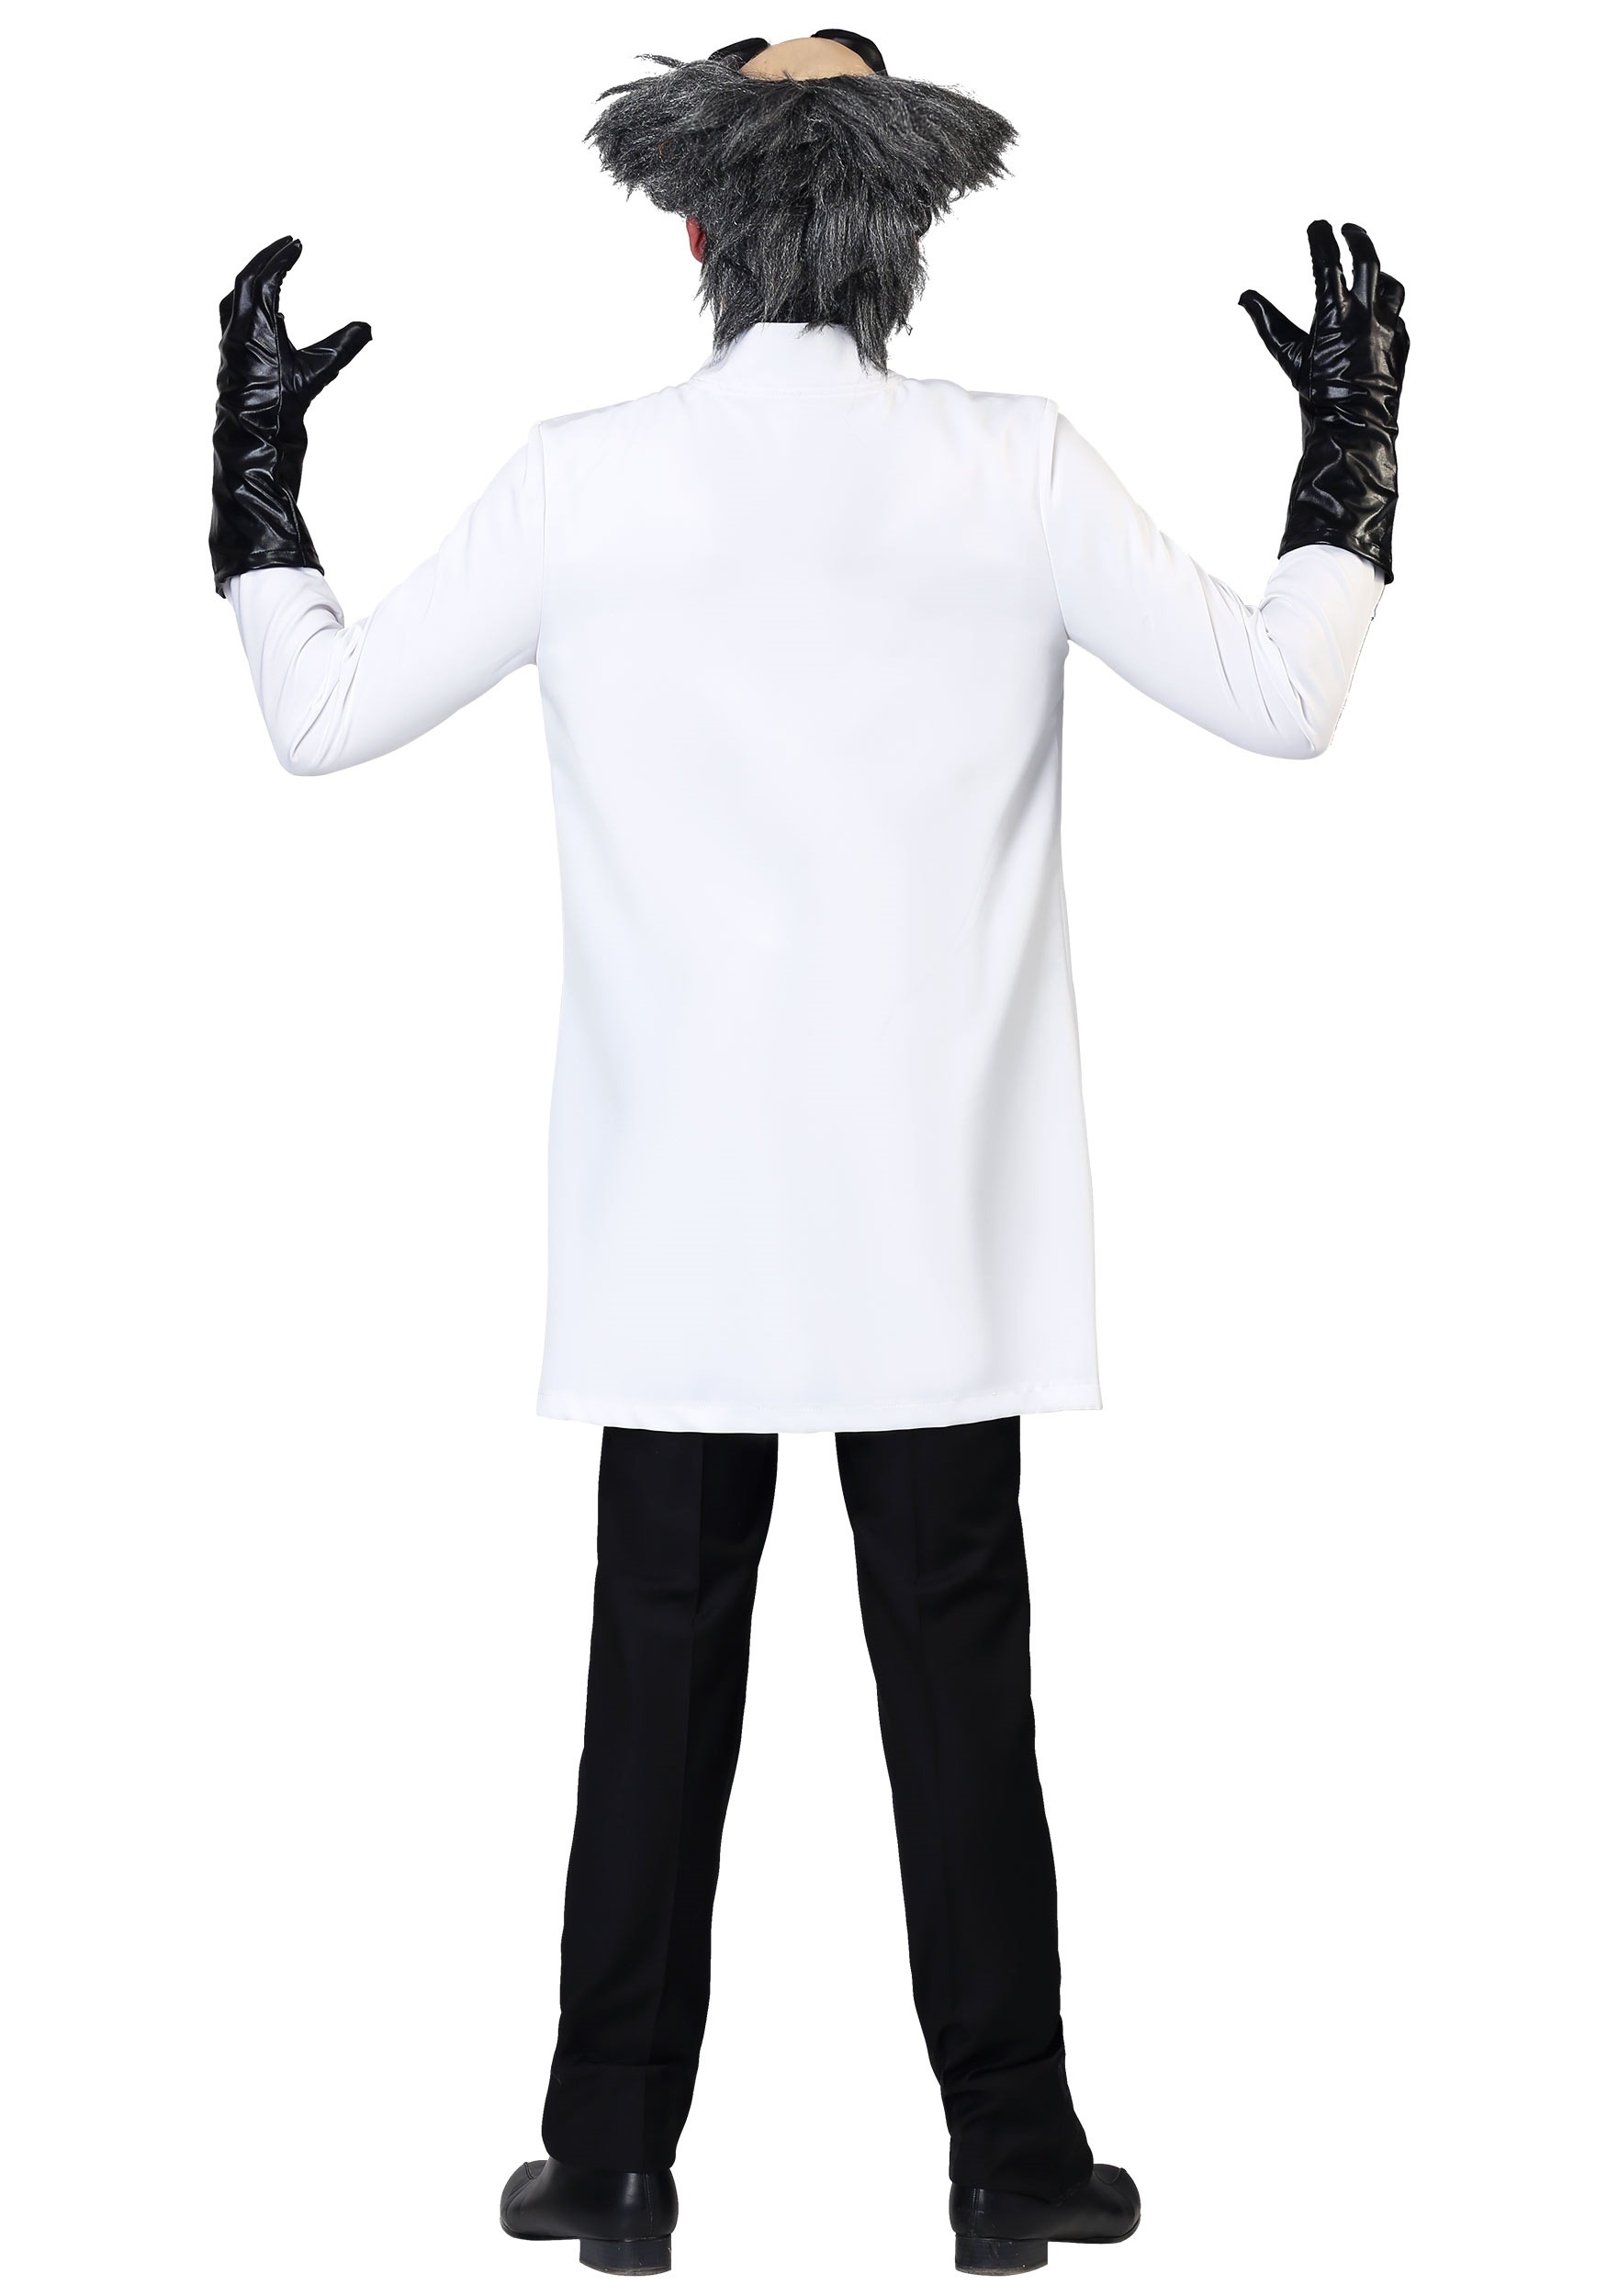 Mad Scientist Costume For Adults